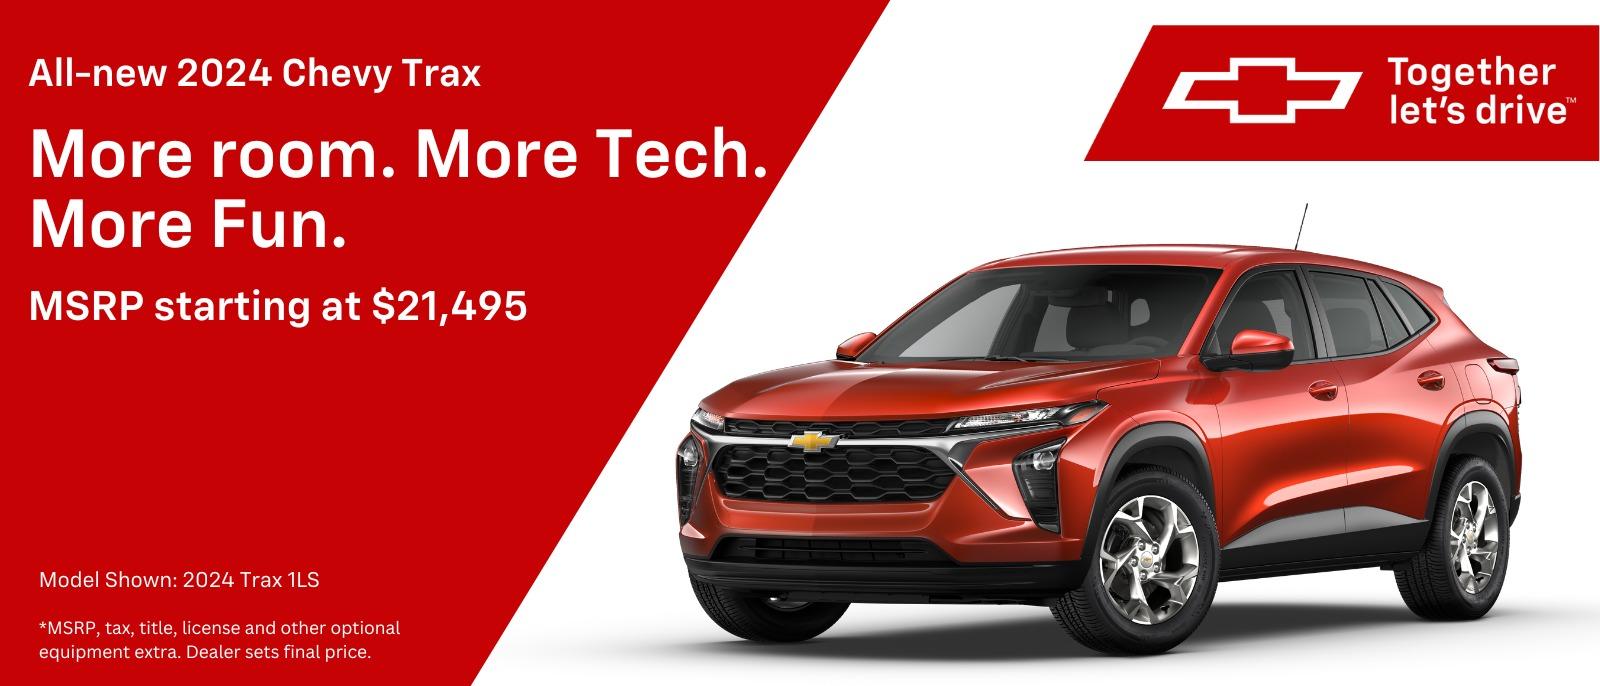 All-new 2024 Chevy Trax More room. More Tech. More Fun. MSRP starting at $21,495 Model Shown : 2024 Trax 1LS *MSRP, tax, title, license and other optional equipment extra. Dealer sets final price.